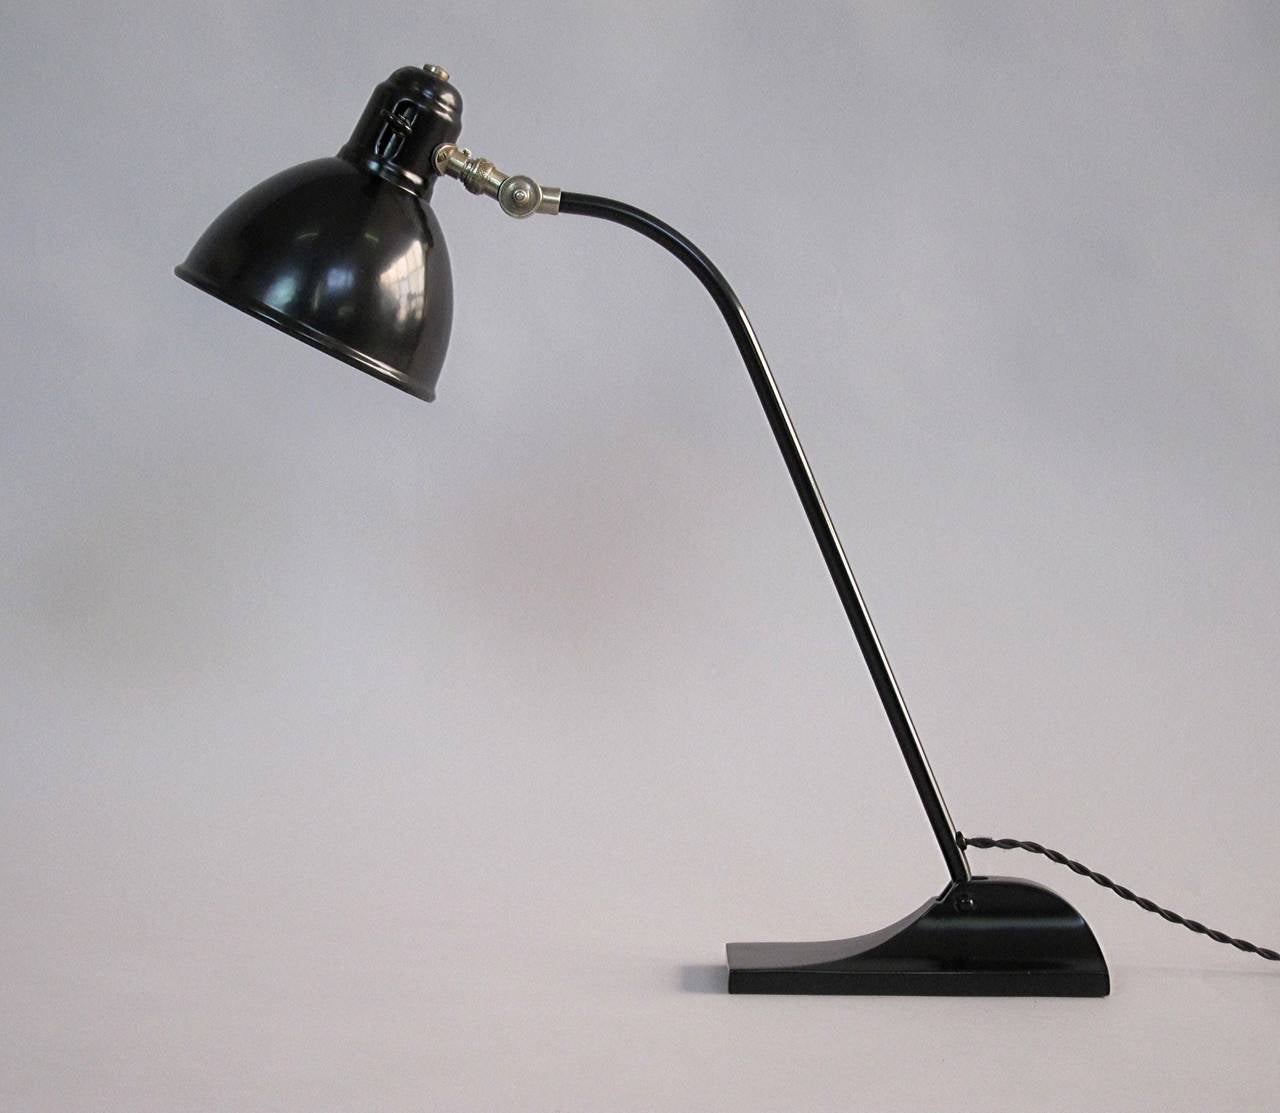 Large Desk Lamp with a heavy and stable Iron Base, the Inside of the Shade is white enameled, manufactured by BAG Turgi Switzerland 1930's, restored.